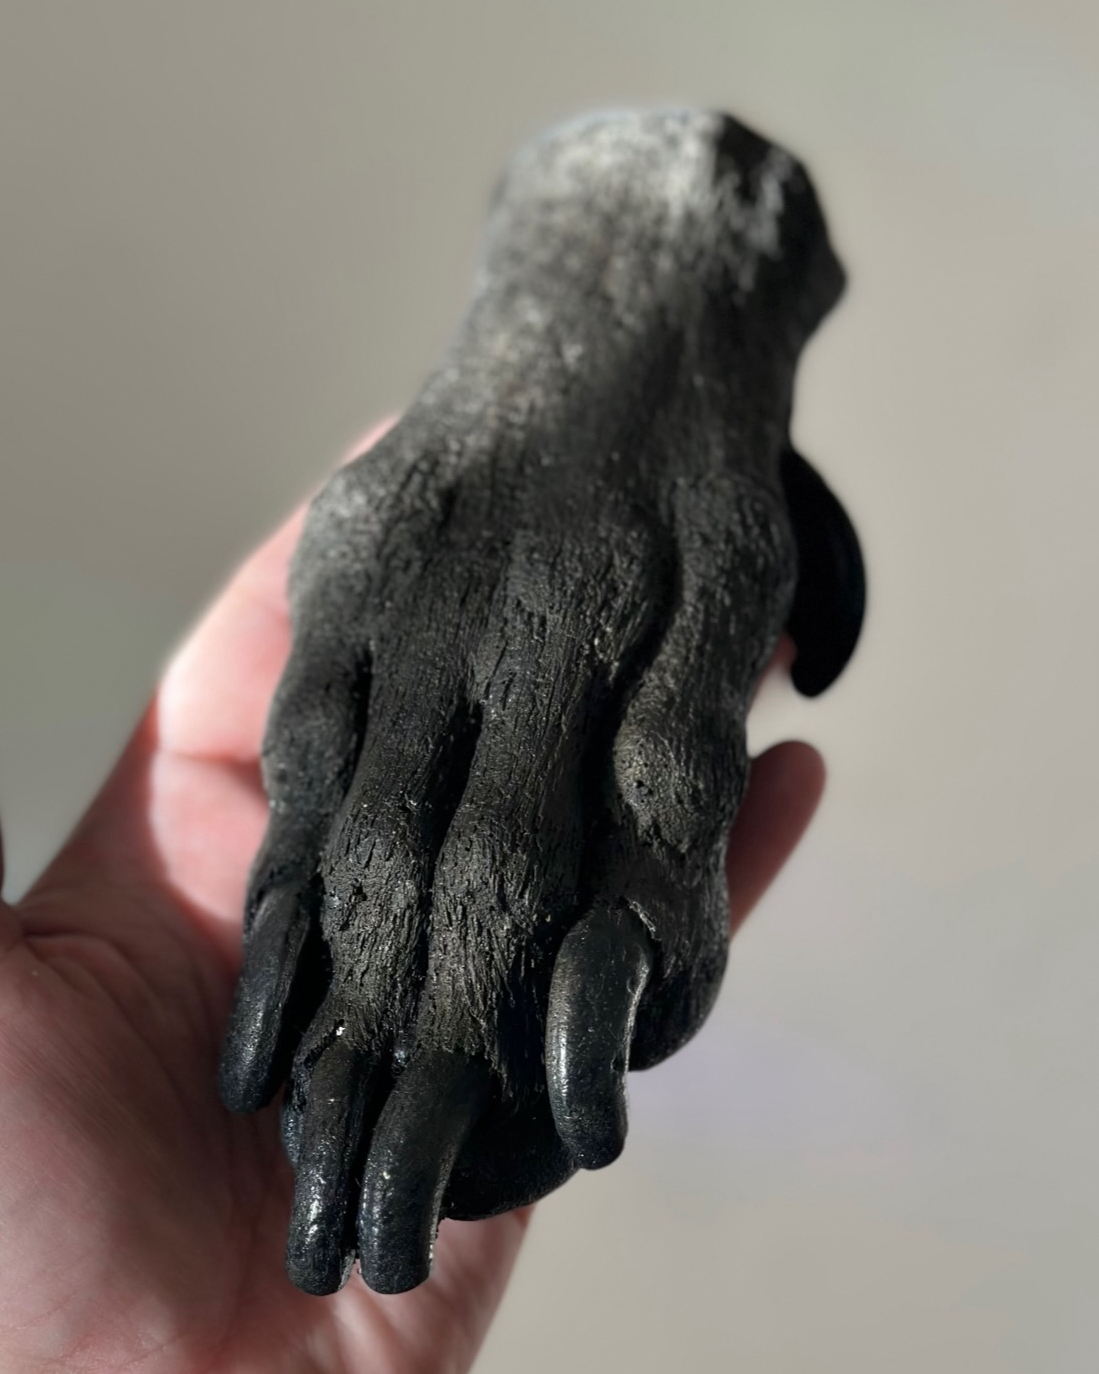 Cast of a paw from a large dog being held in a person's hand